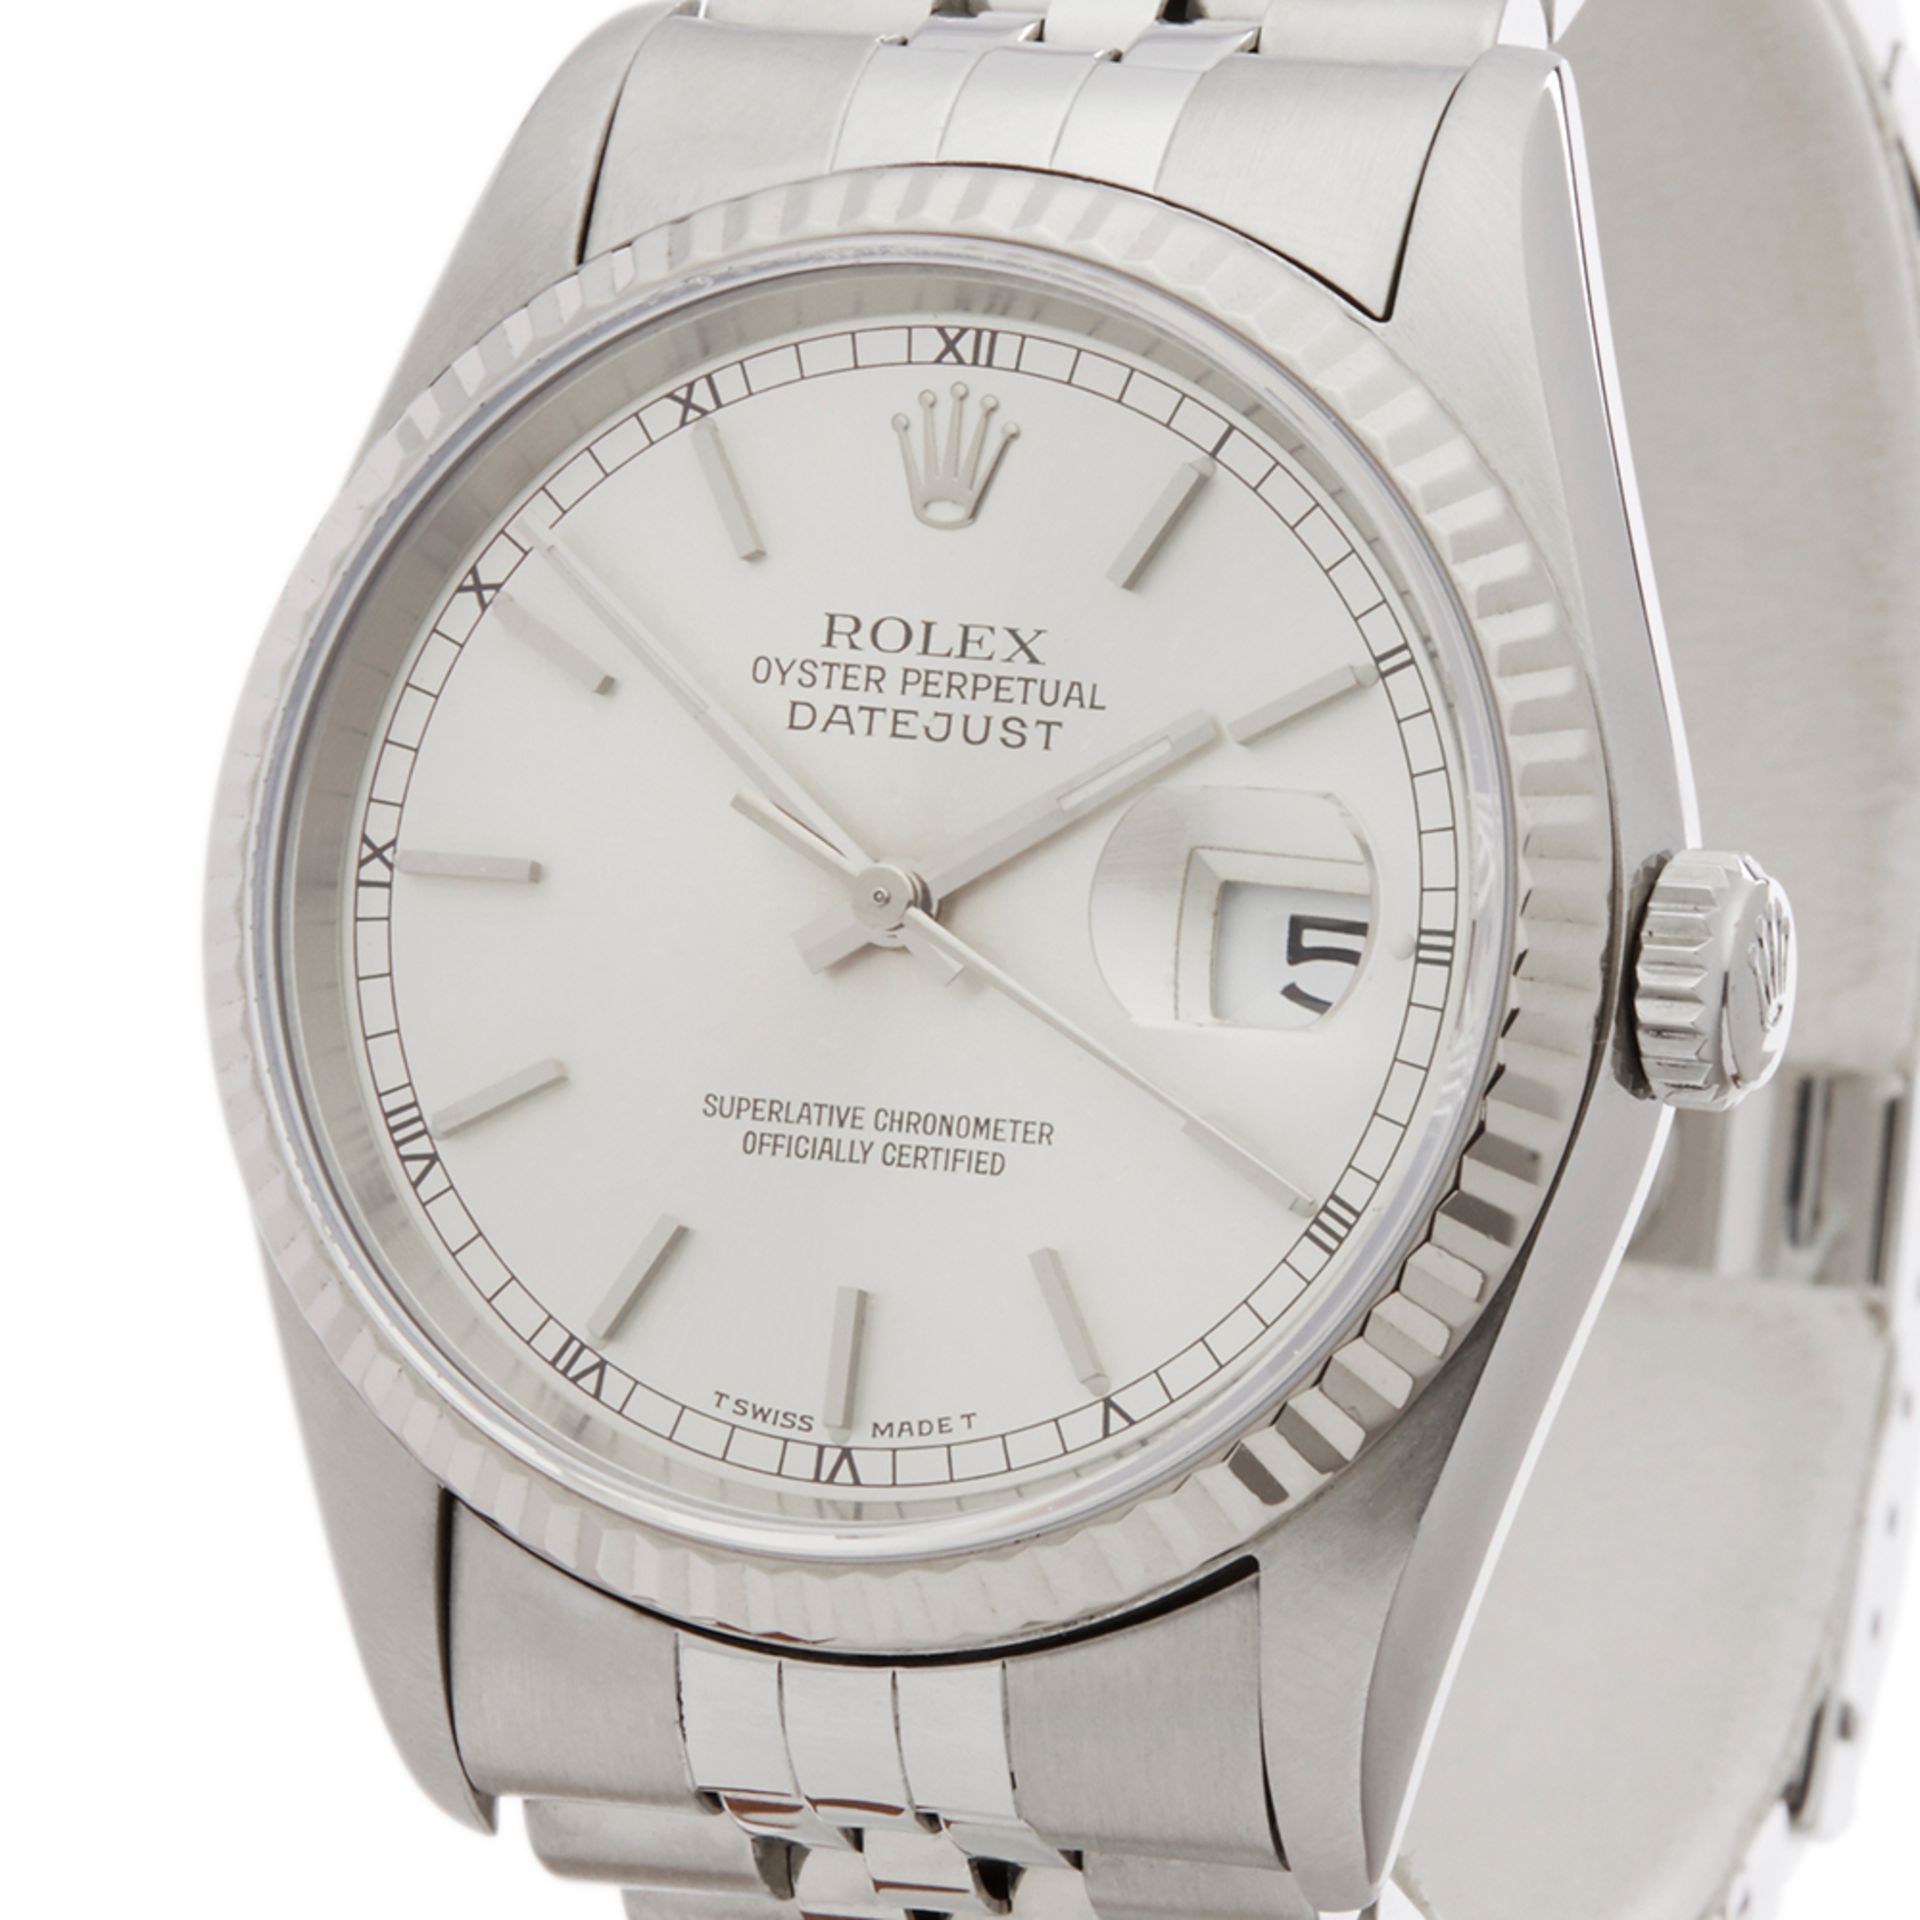 Rolex Datejust 36mm Stainless steel & 18k white gold 16234